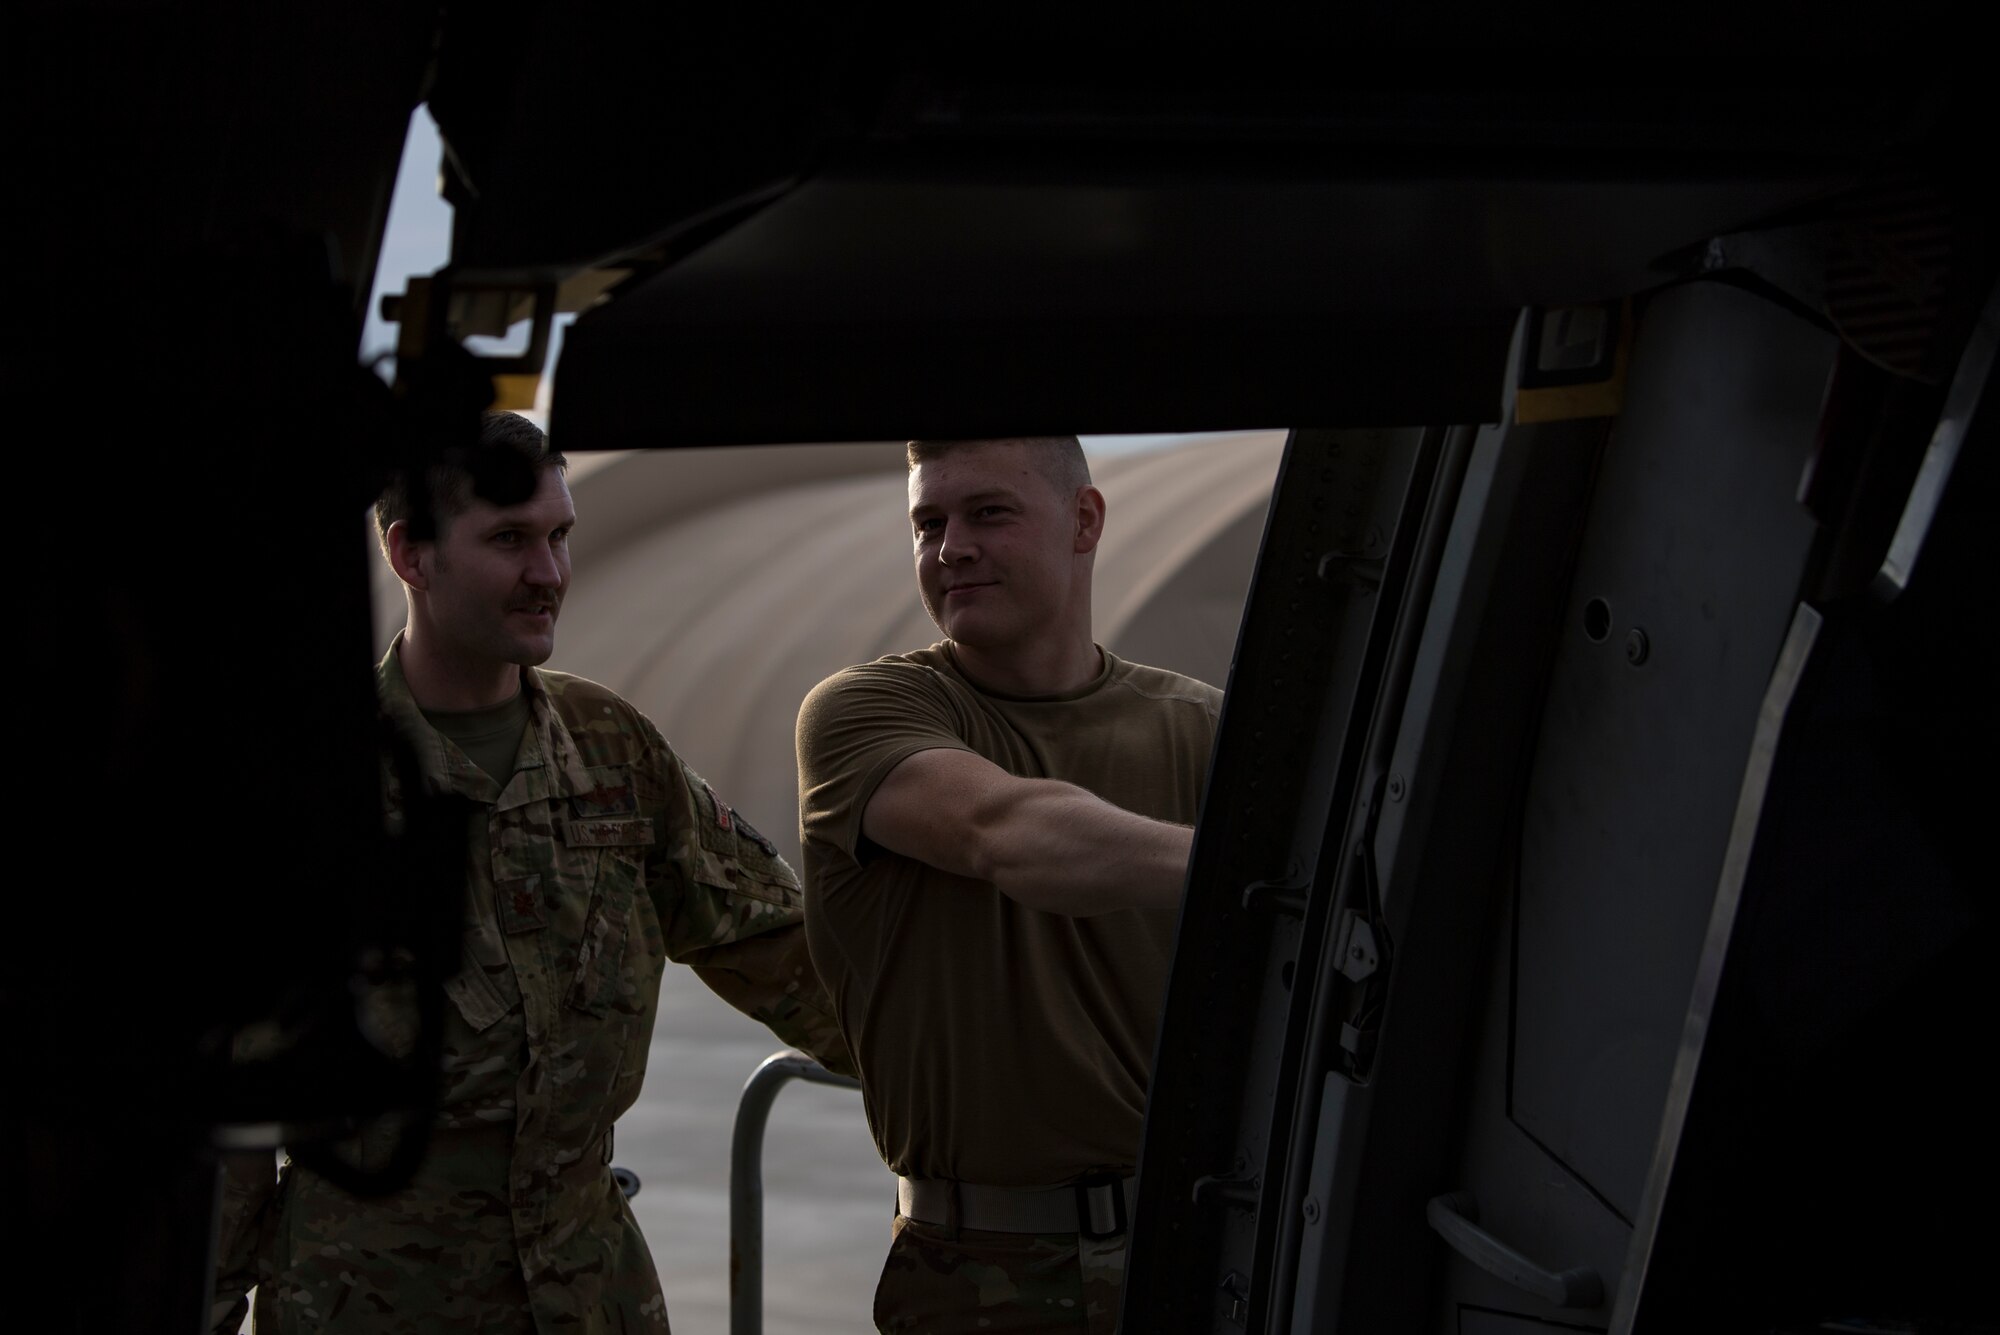 U.S. Air Force KC-10 Extender aircrew members assigned to the 908th Expeditionary Air Refueling Squadron conduct preflight checks at Al Dhafra Air Base, United Arab Emirates, Jan. 11, 2020.